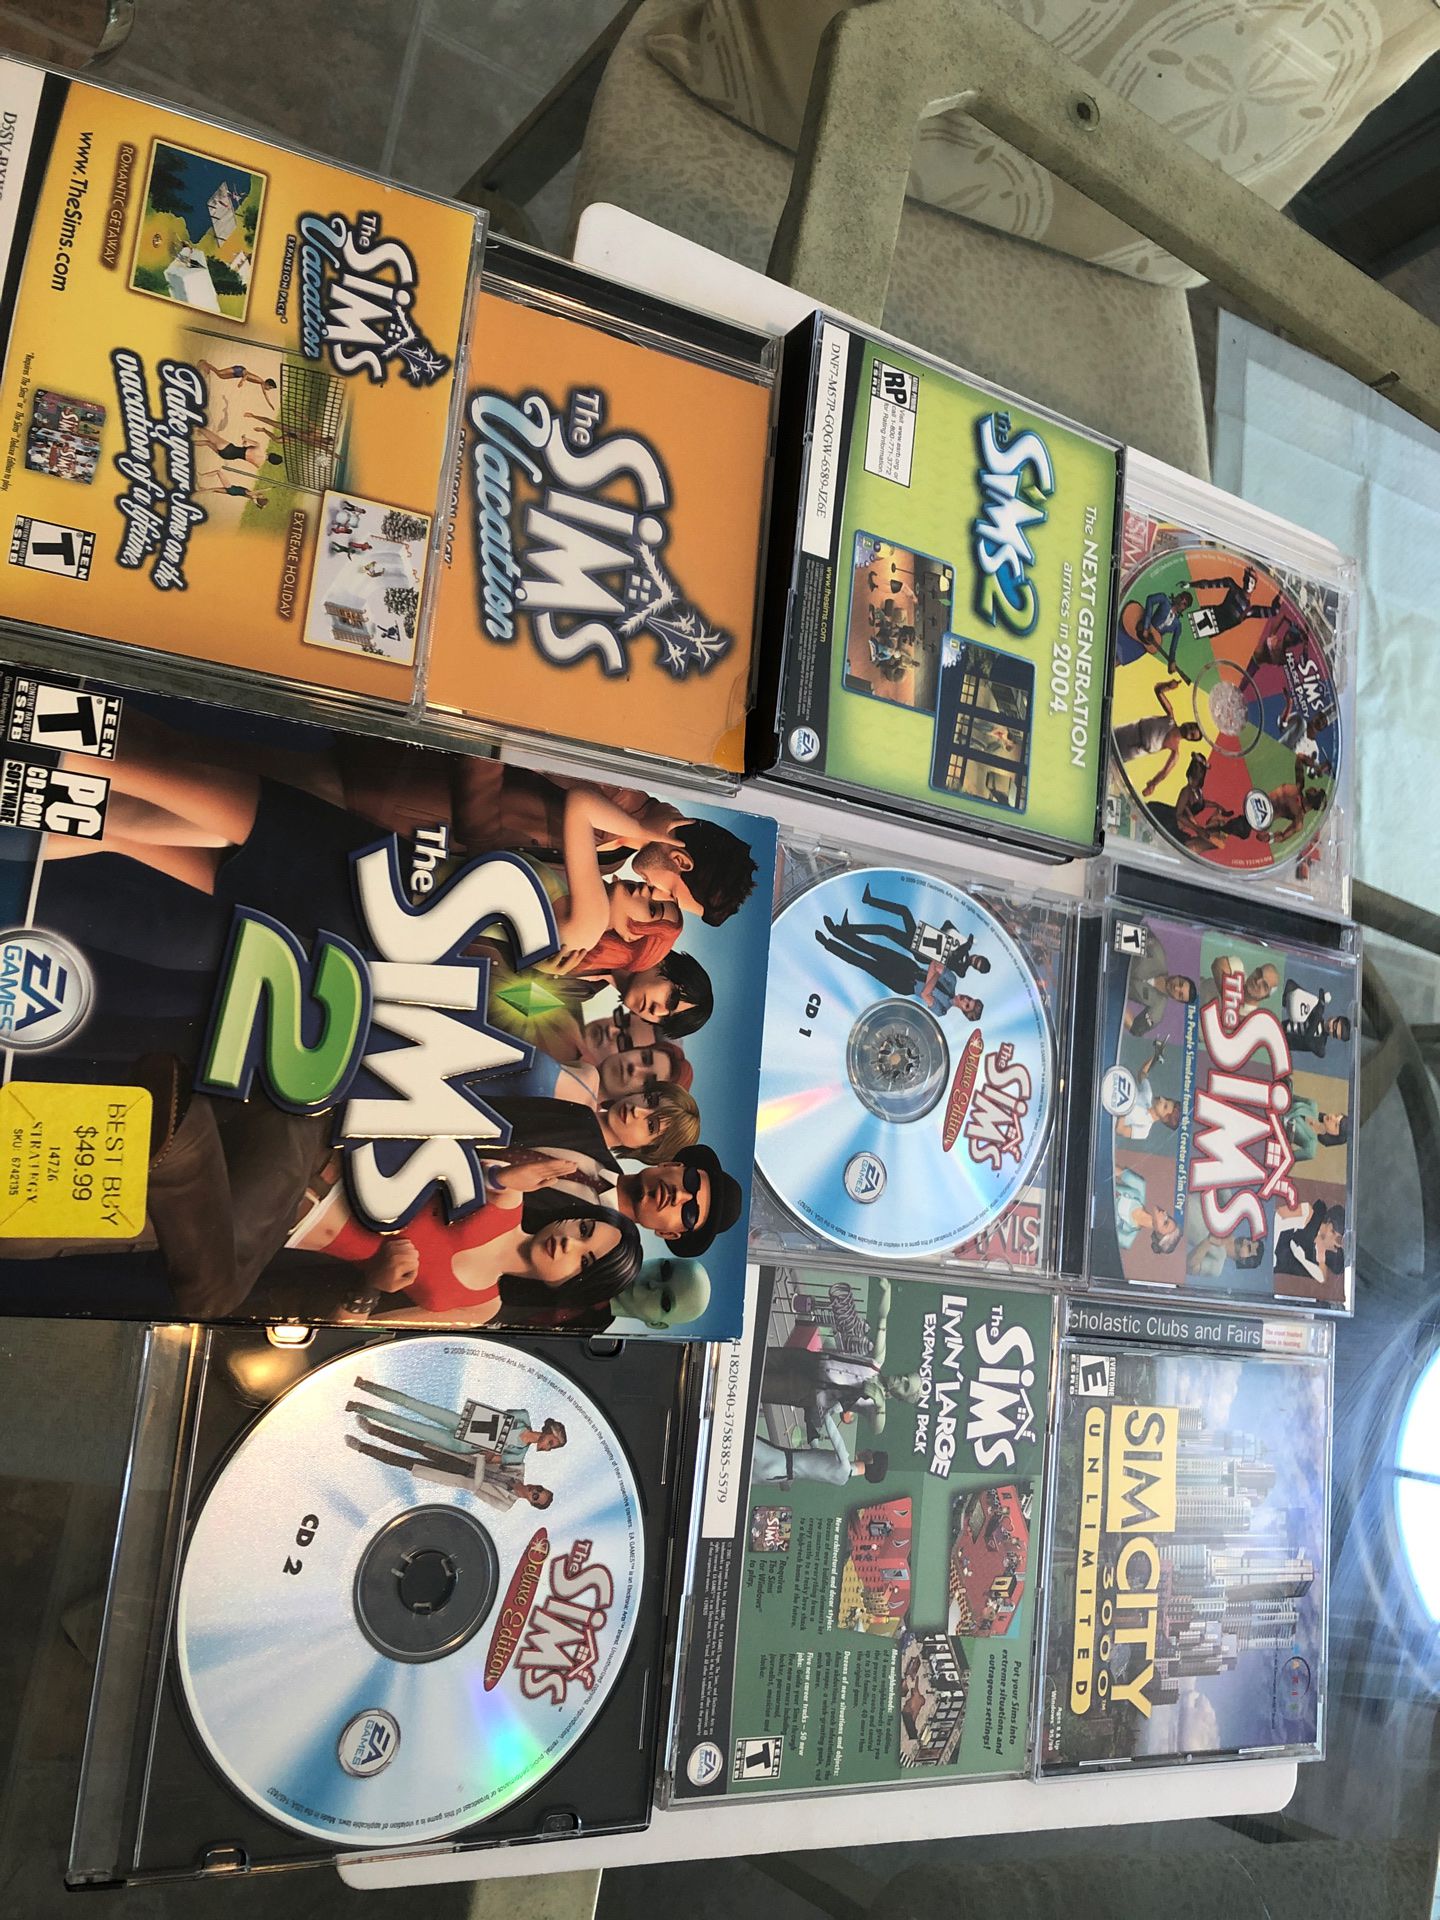 Over 200.00 worth of Sims computer games. Design your own home or city for the Sims